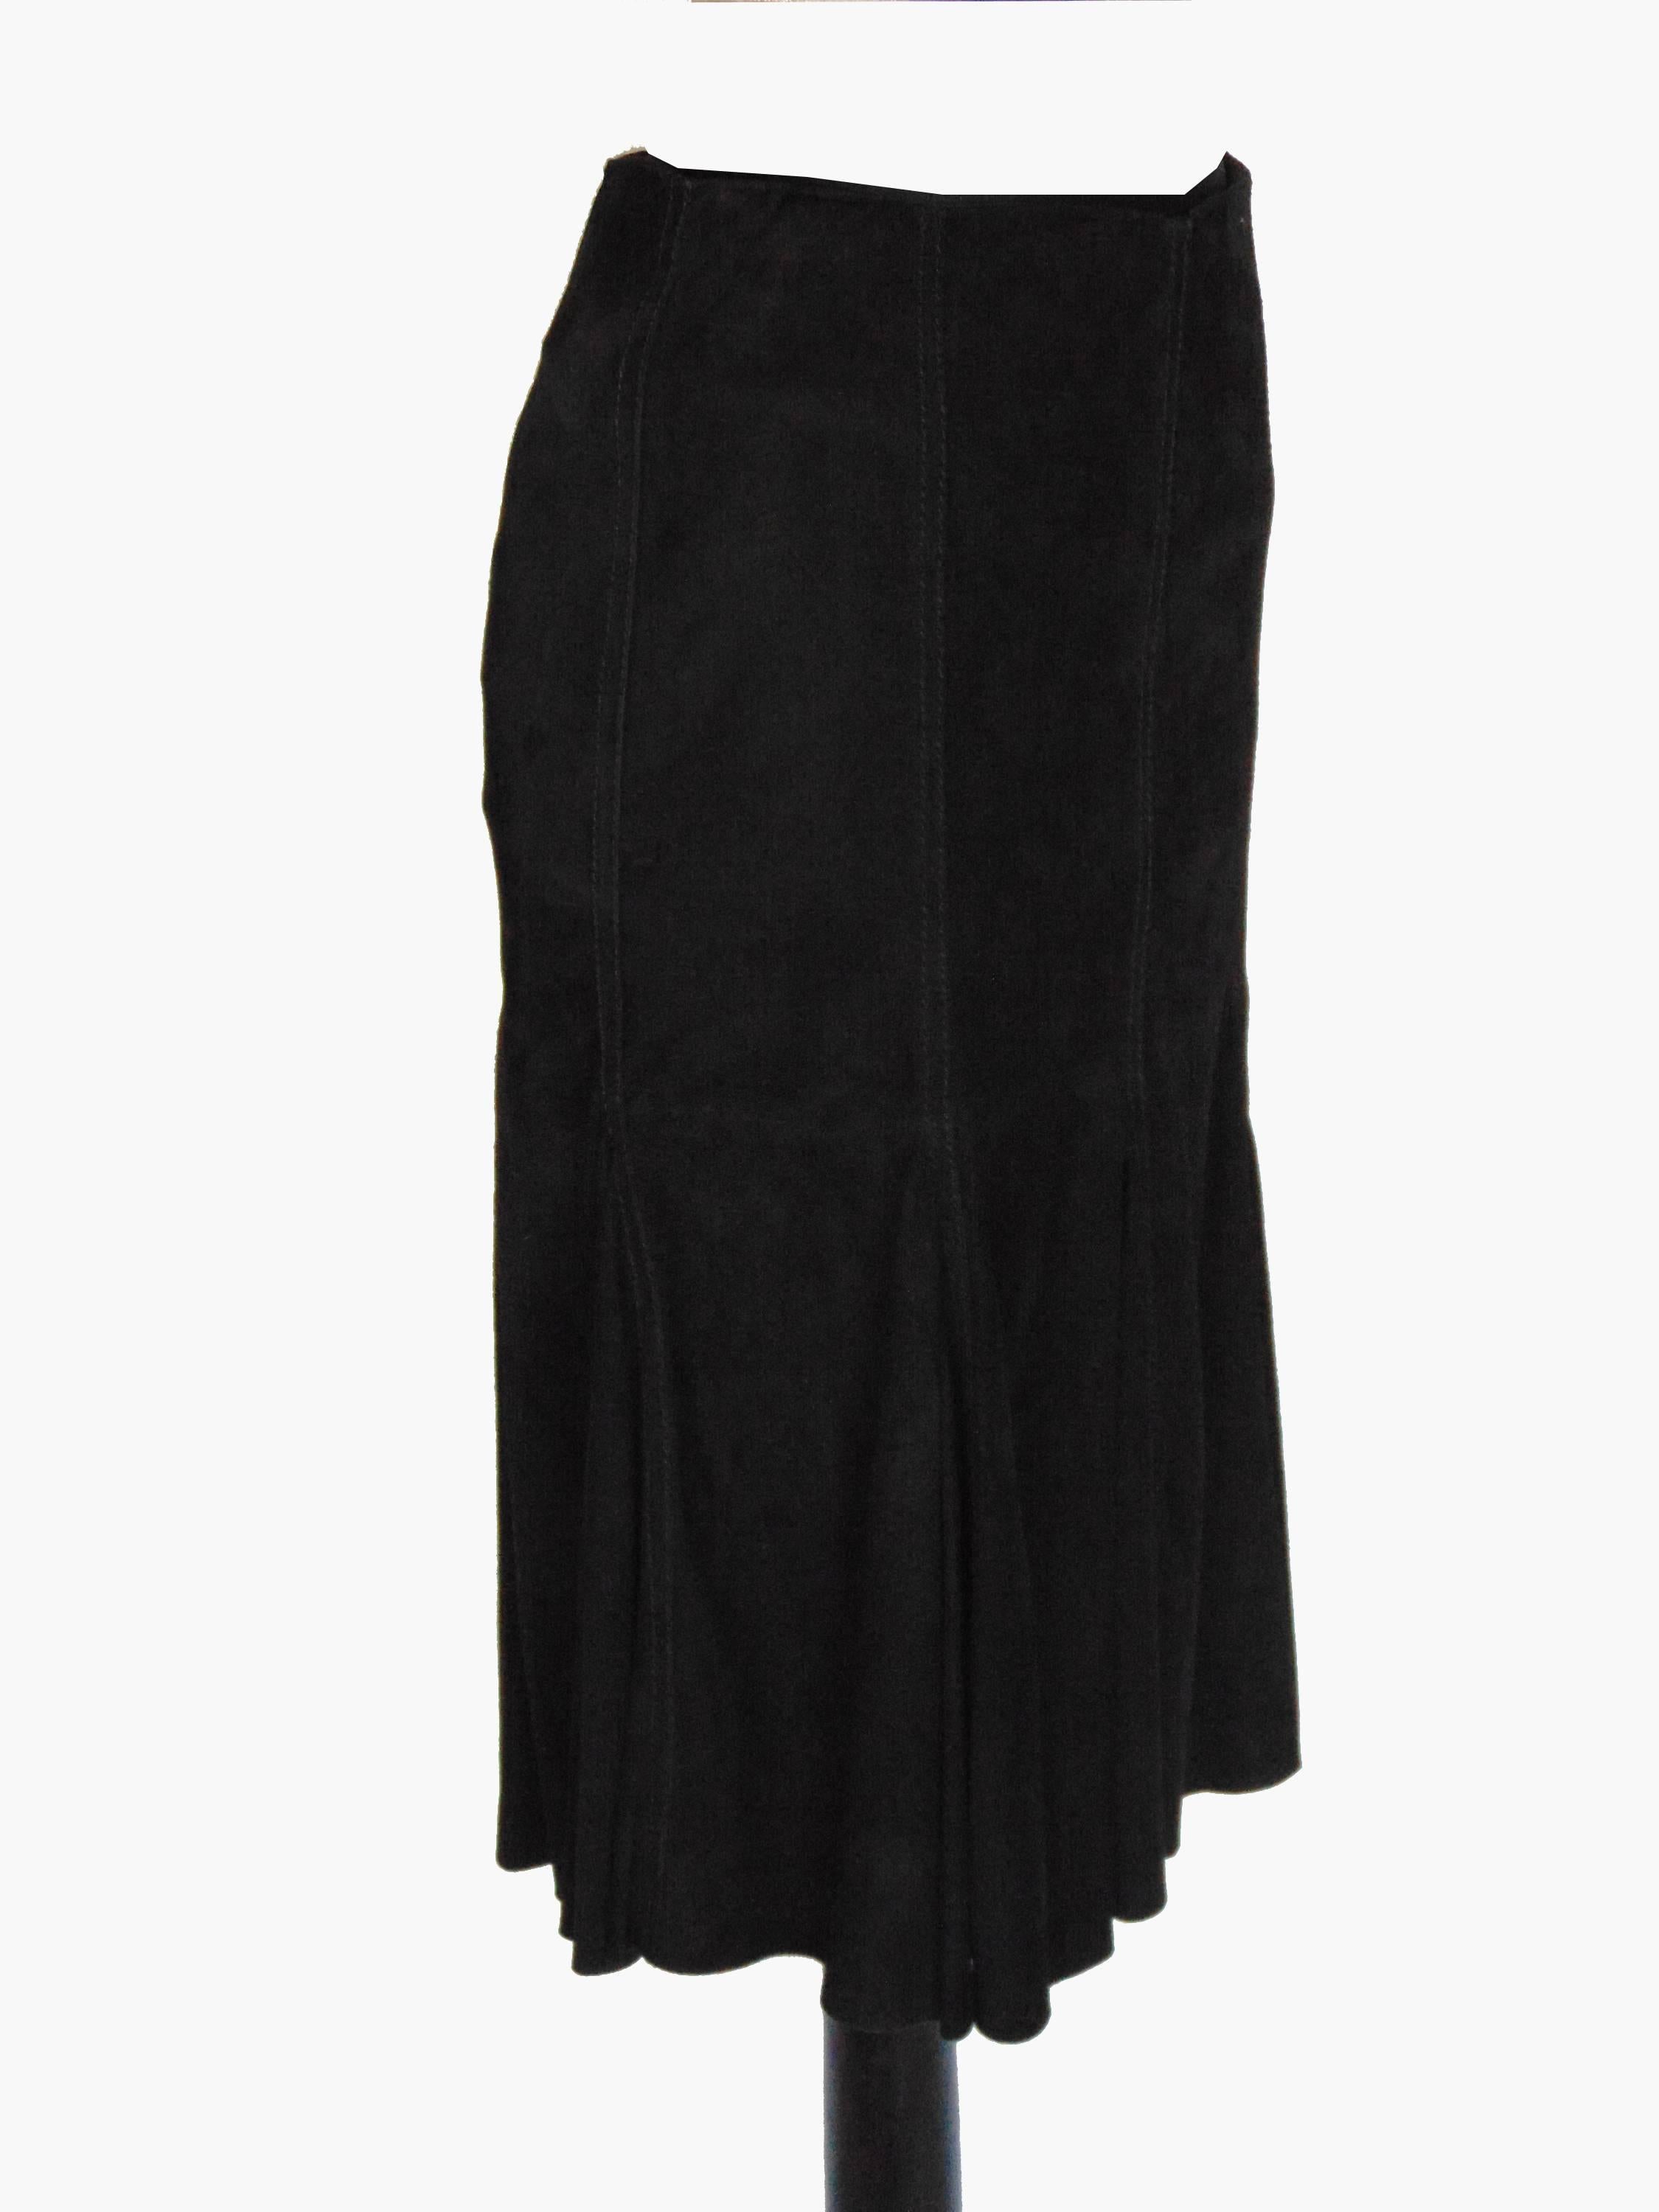 Genny Italy Supple Black Suede Leather Mermaid Skirt 1990s Size S 1